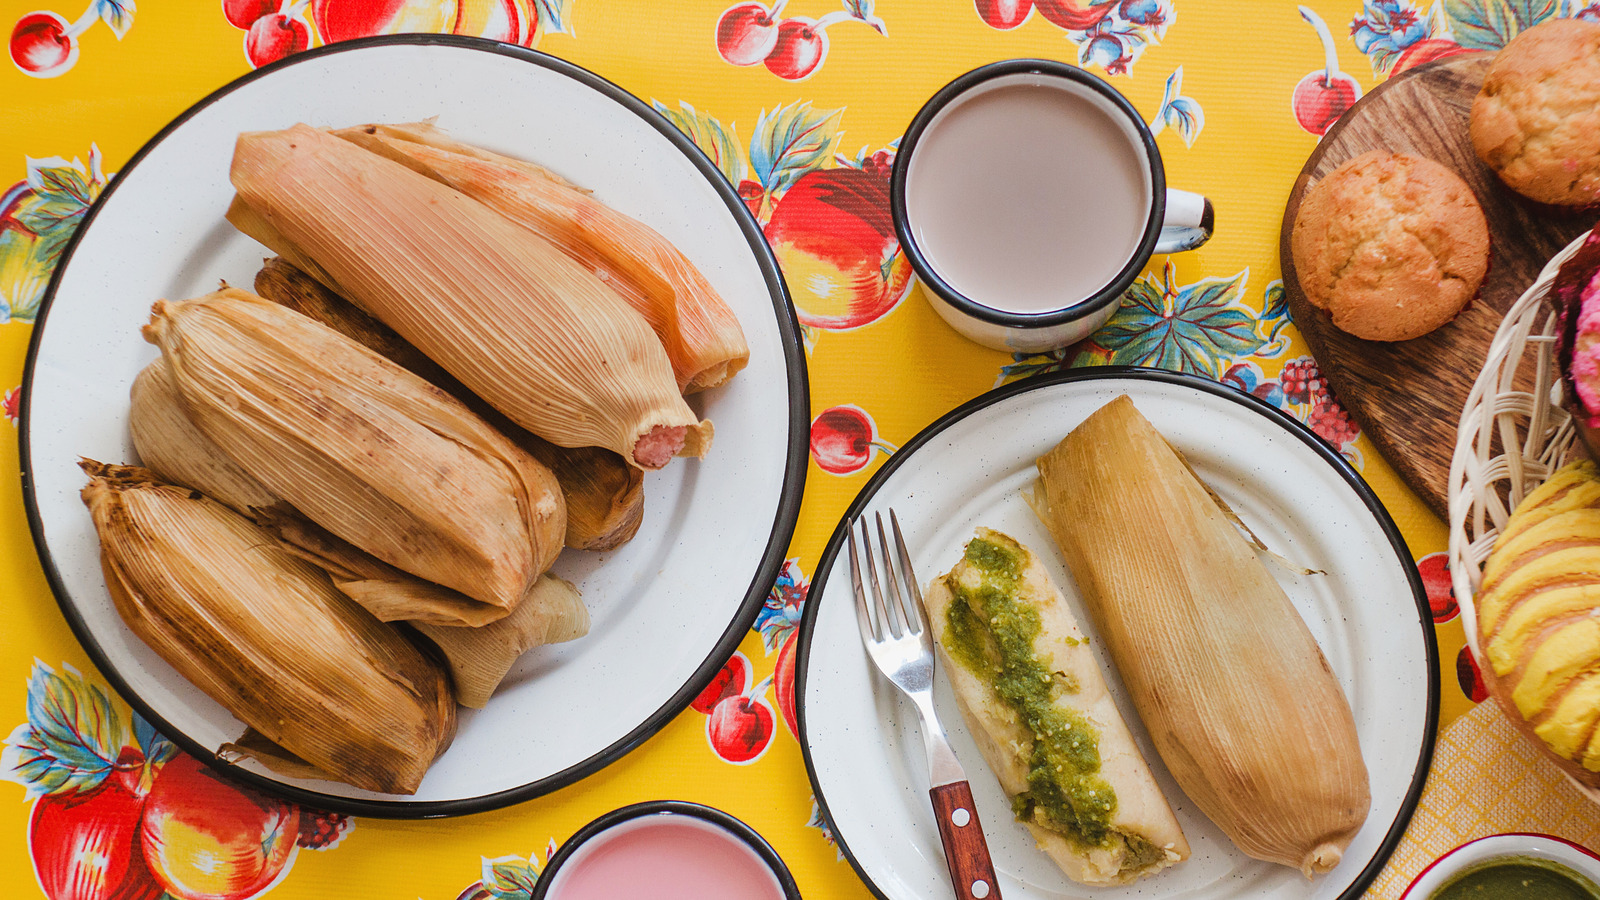 What Tamalera Should I Get? Find The Best Tamale Steamers For Your Needs